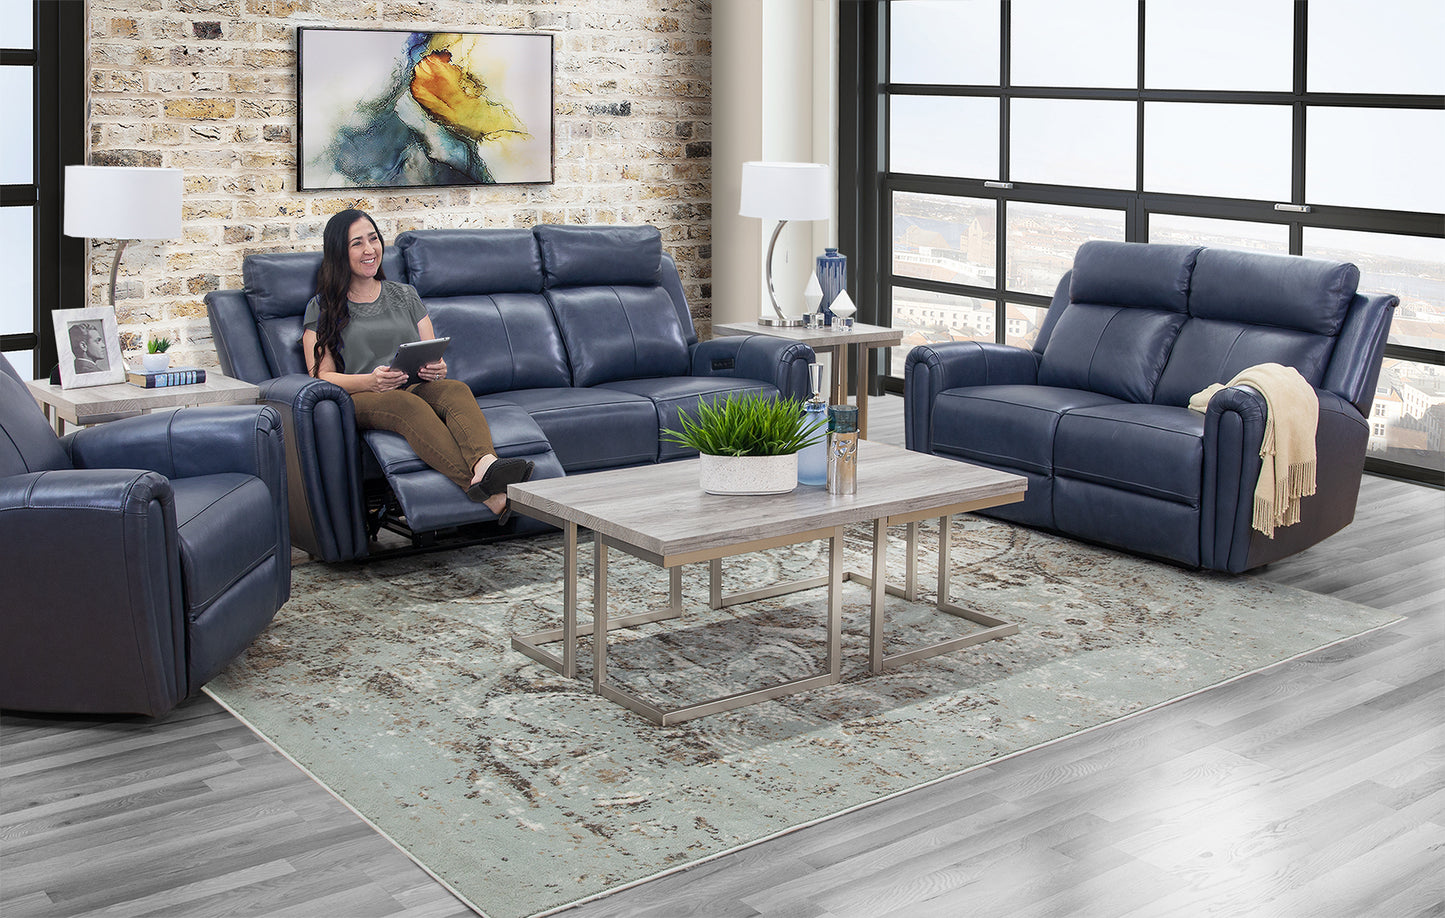 Jonathan Blue 5 Piece Leather Reclining Living Room